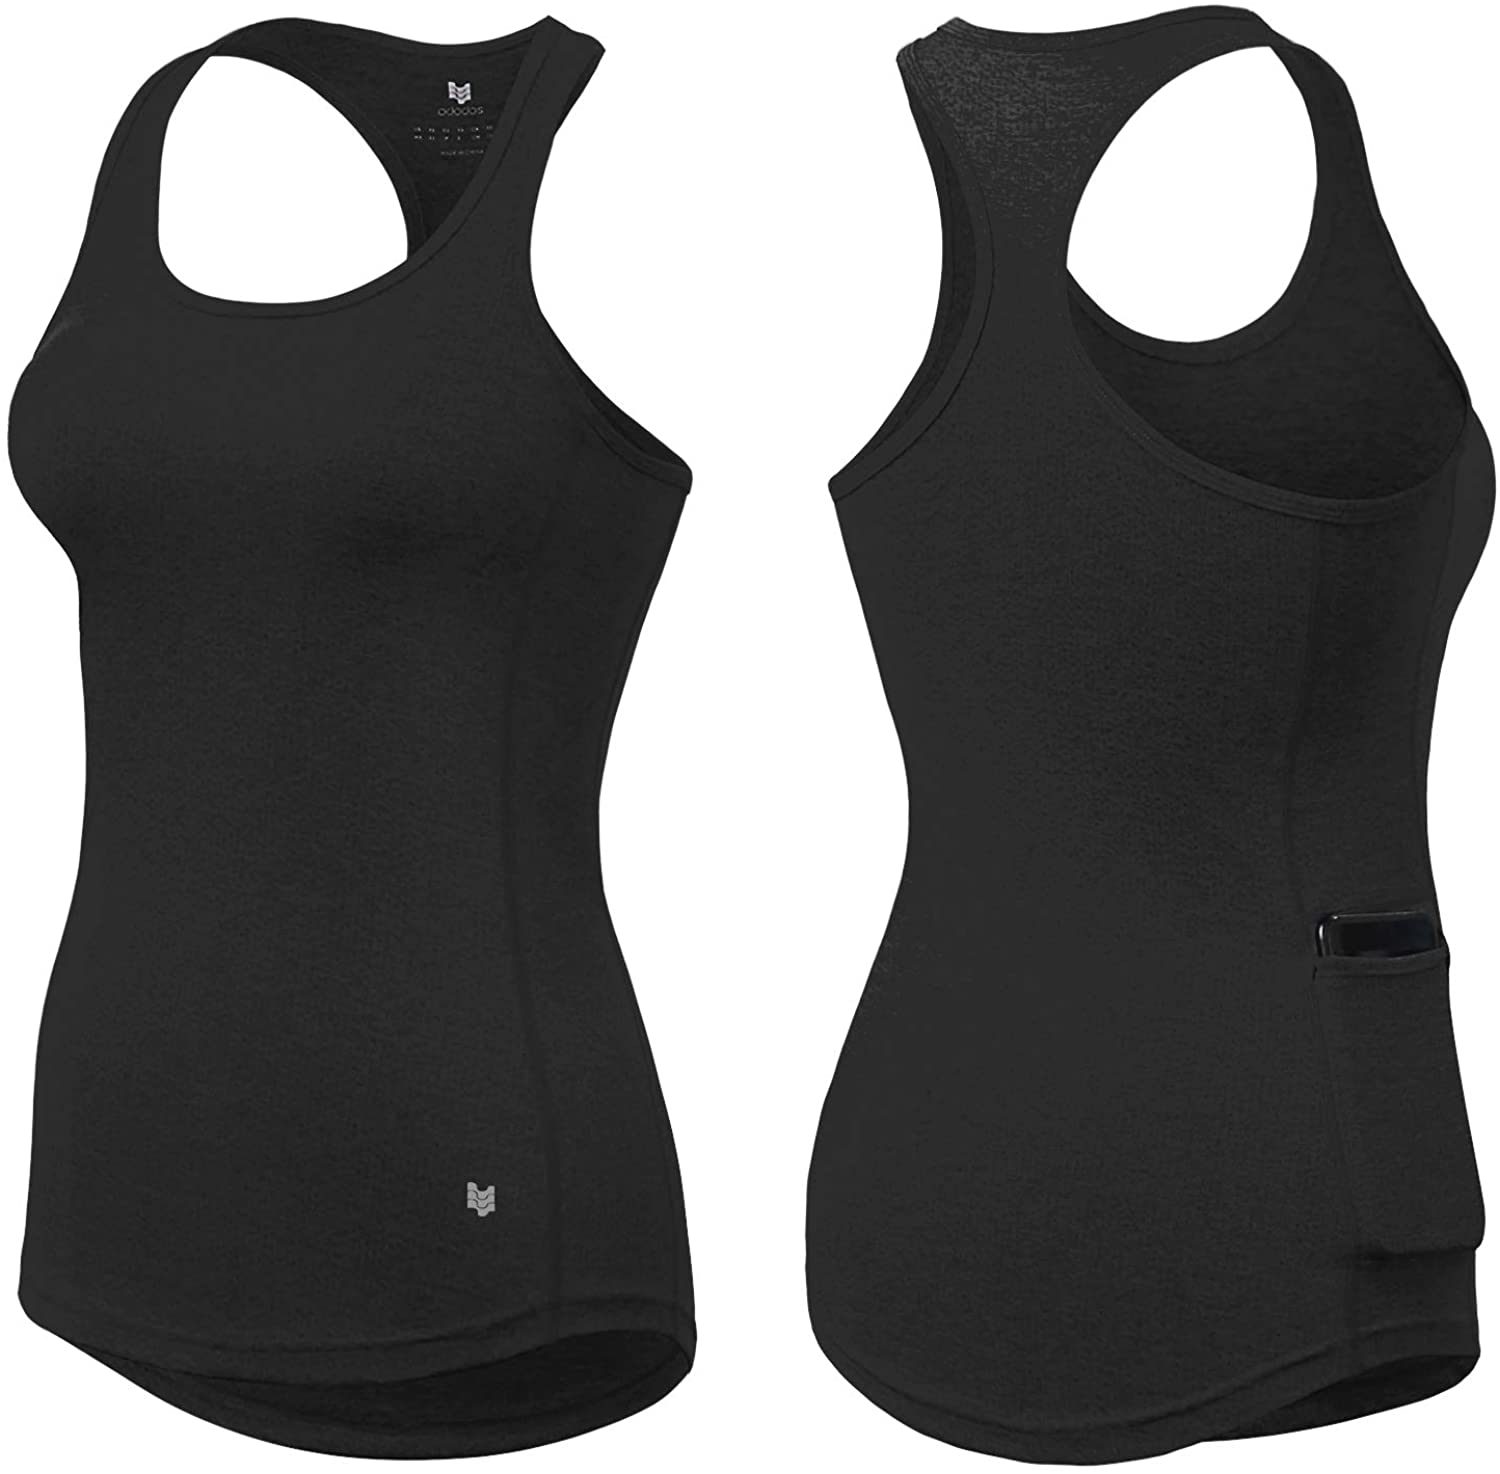 Exercise Gym Yoga Shirts ODODOS Workout Tank Tops for Women Strappy Athletic Tanks with Side Pocket 